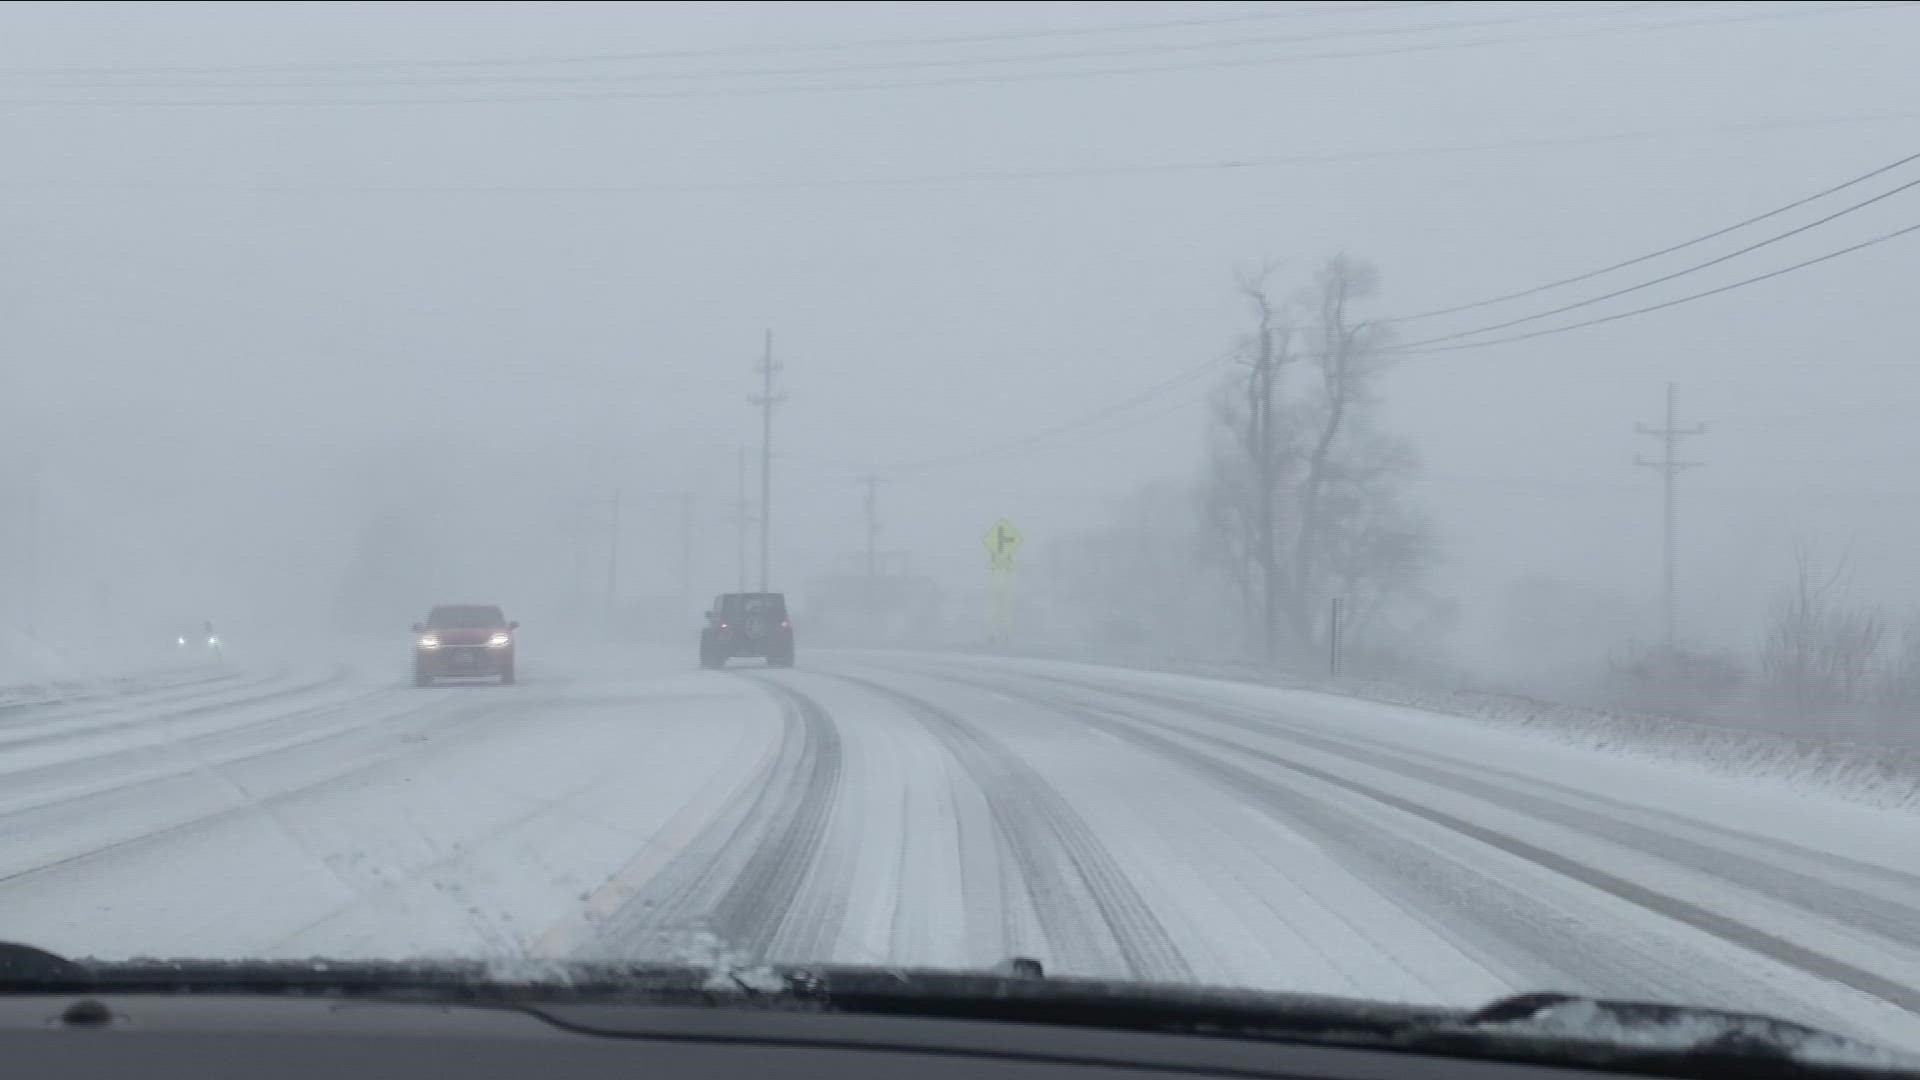 Travel bans are in place for Erie, Niagara, Orleans and Genesee counties.